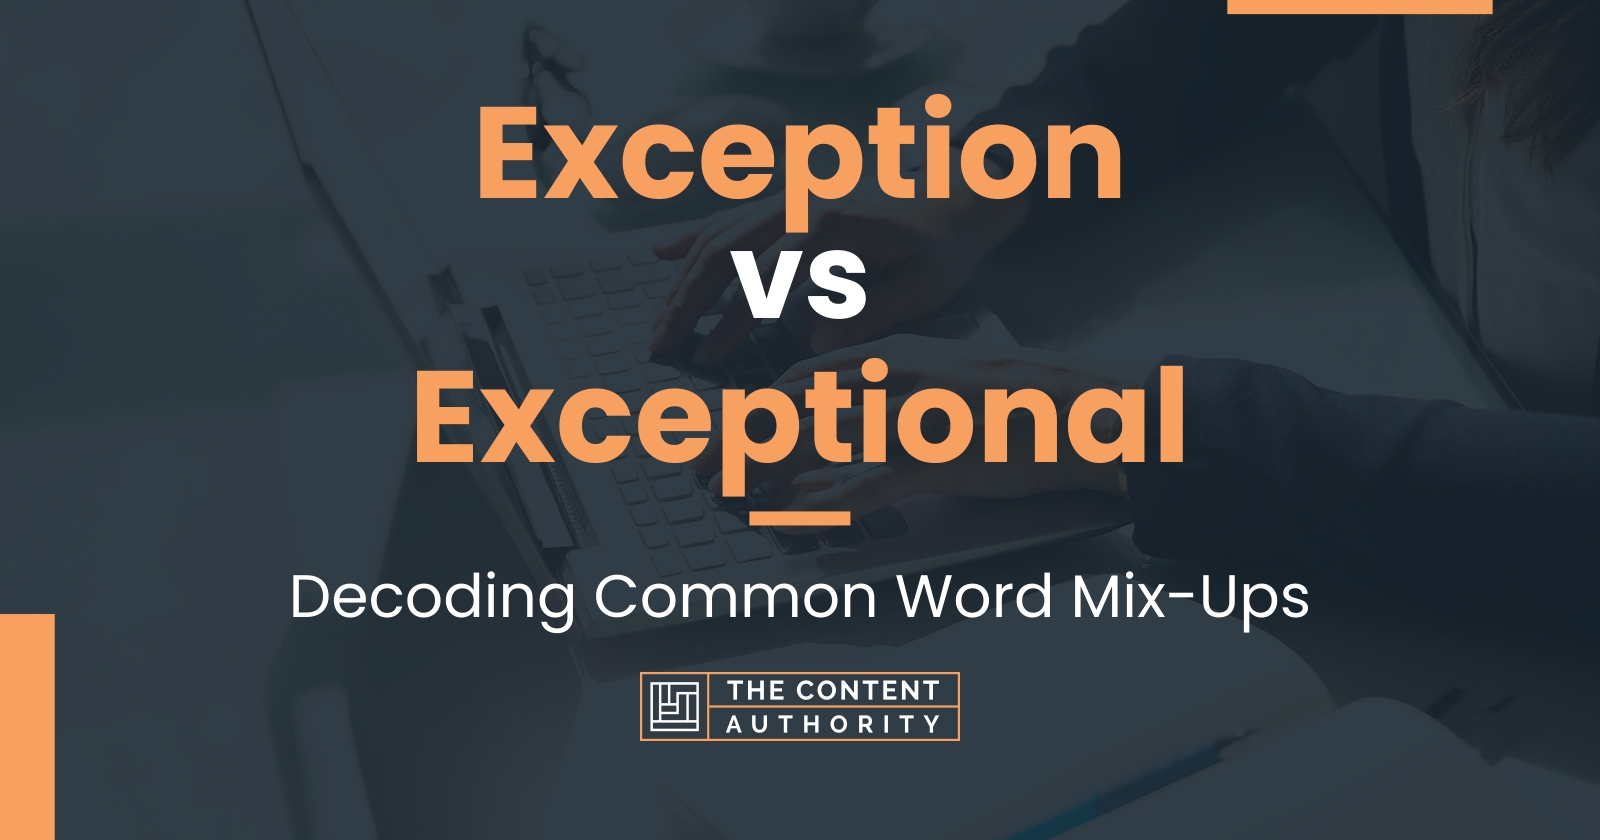 Exception vs Exceptional: Decoding Common Word Mix-Ups